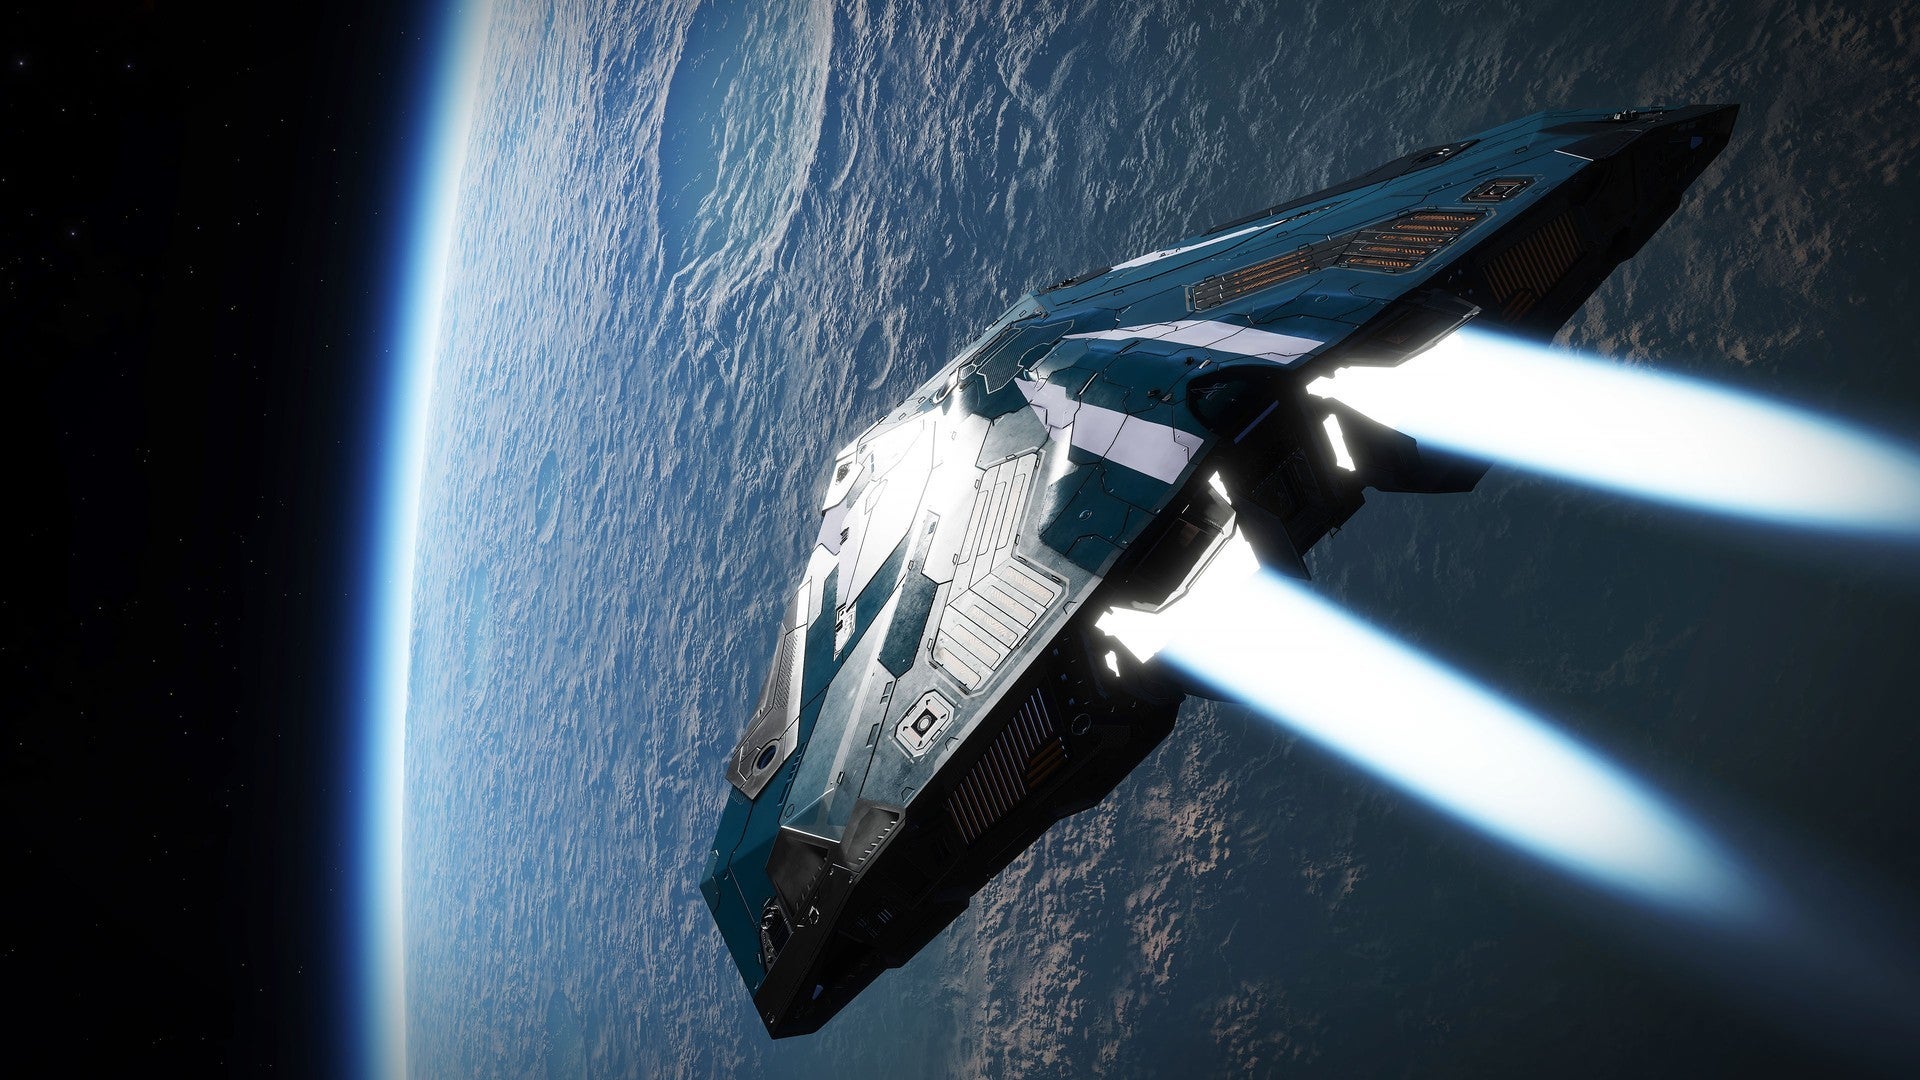 A spaceship flying towards a planet in an Elite Dangerous: Odyssey screenshot.